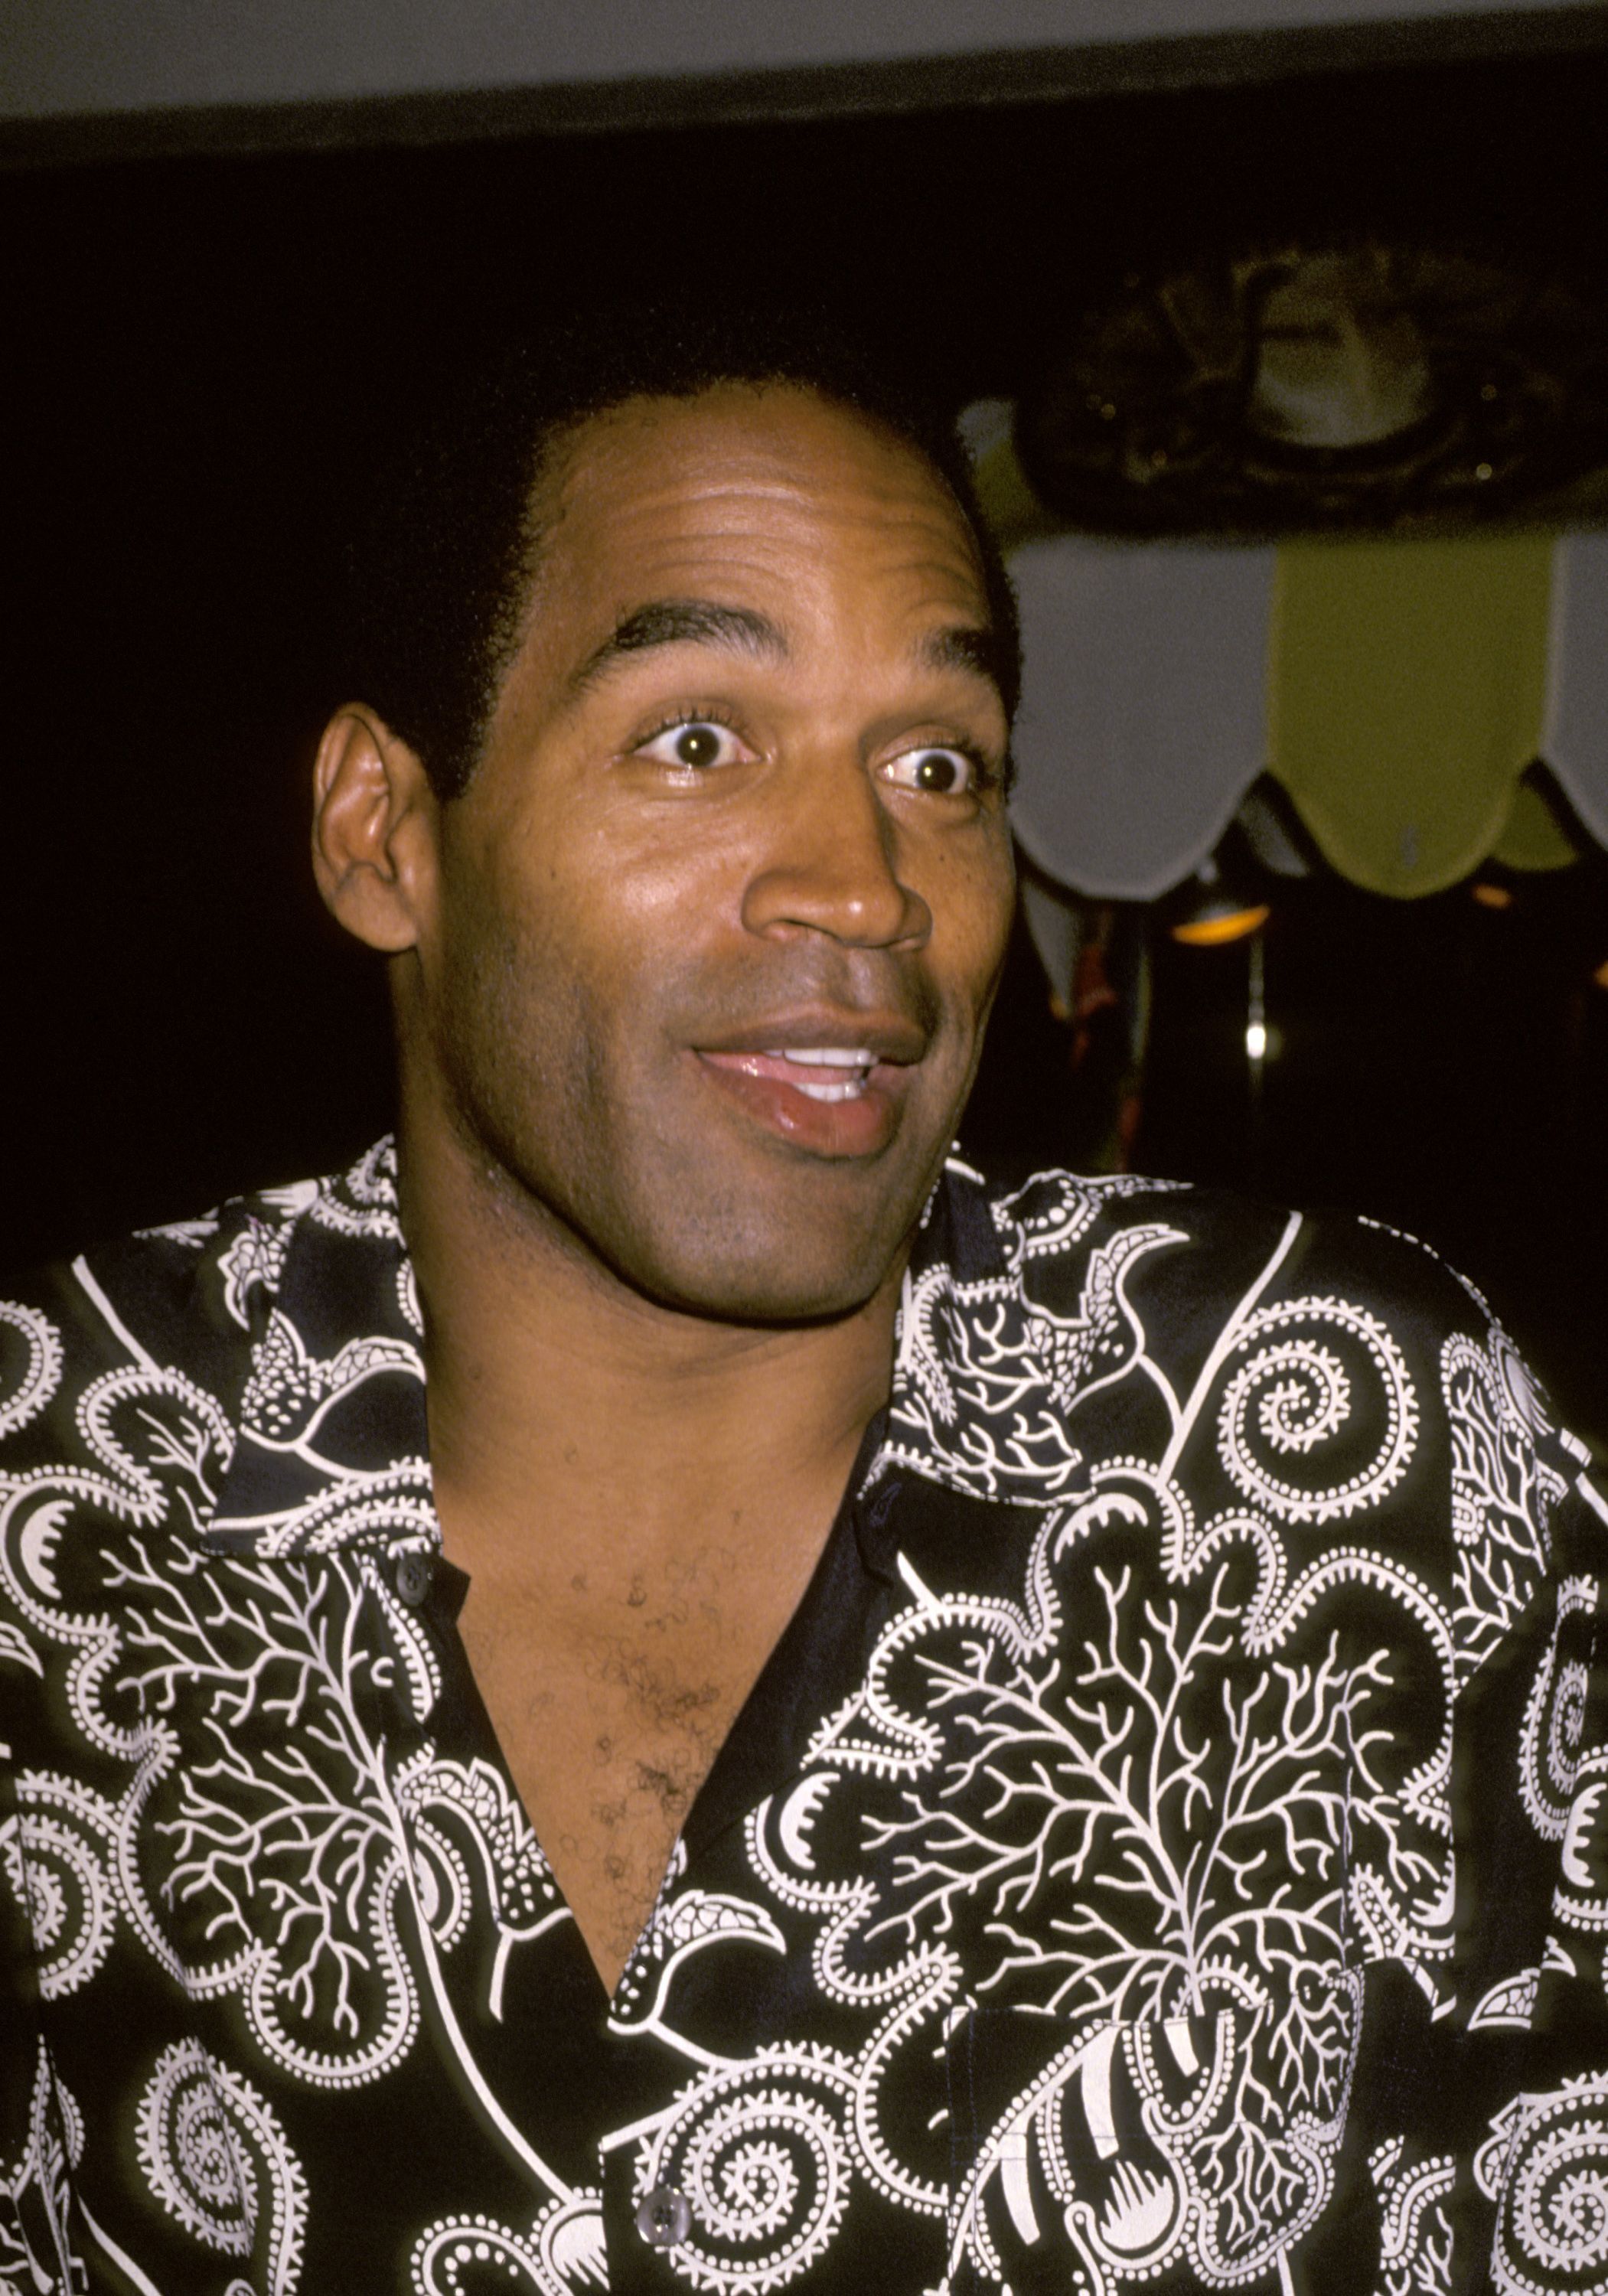 O J Simpson S Former Manager Alleges He Bragged About Hookup With Kris Jenner